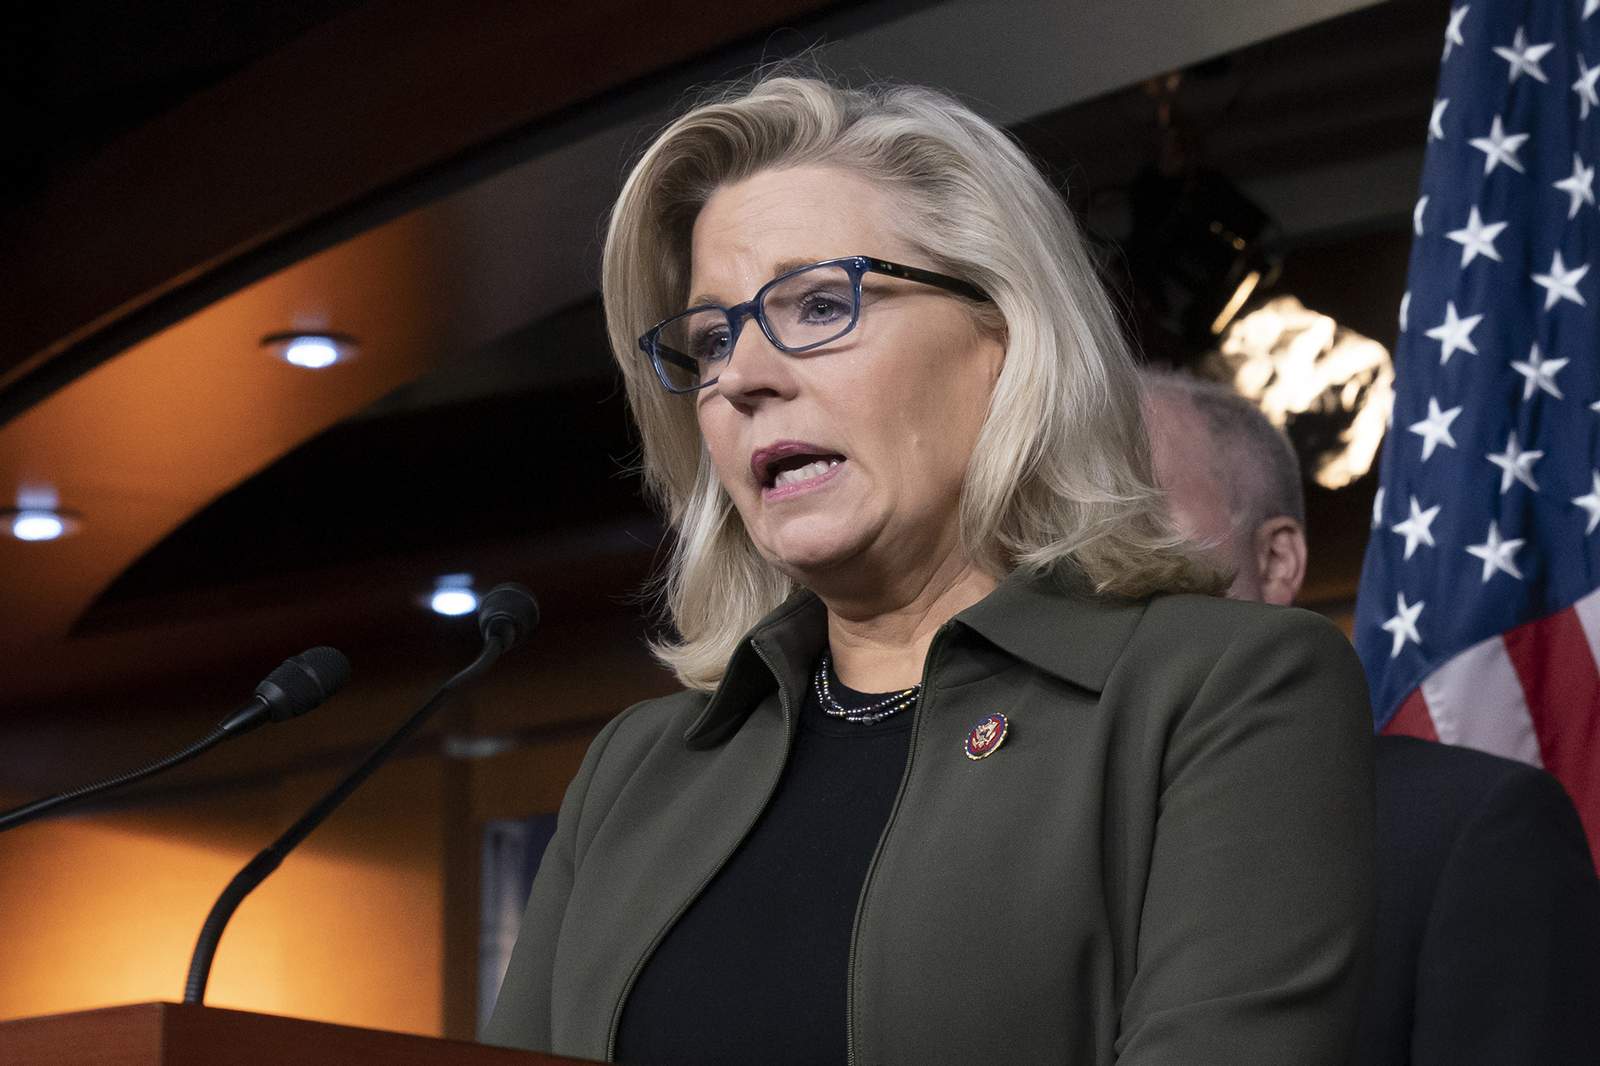 Conservatives lash out at Liz Cheney over Trump criticism